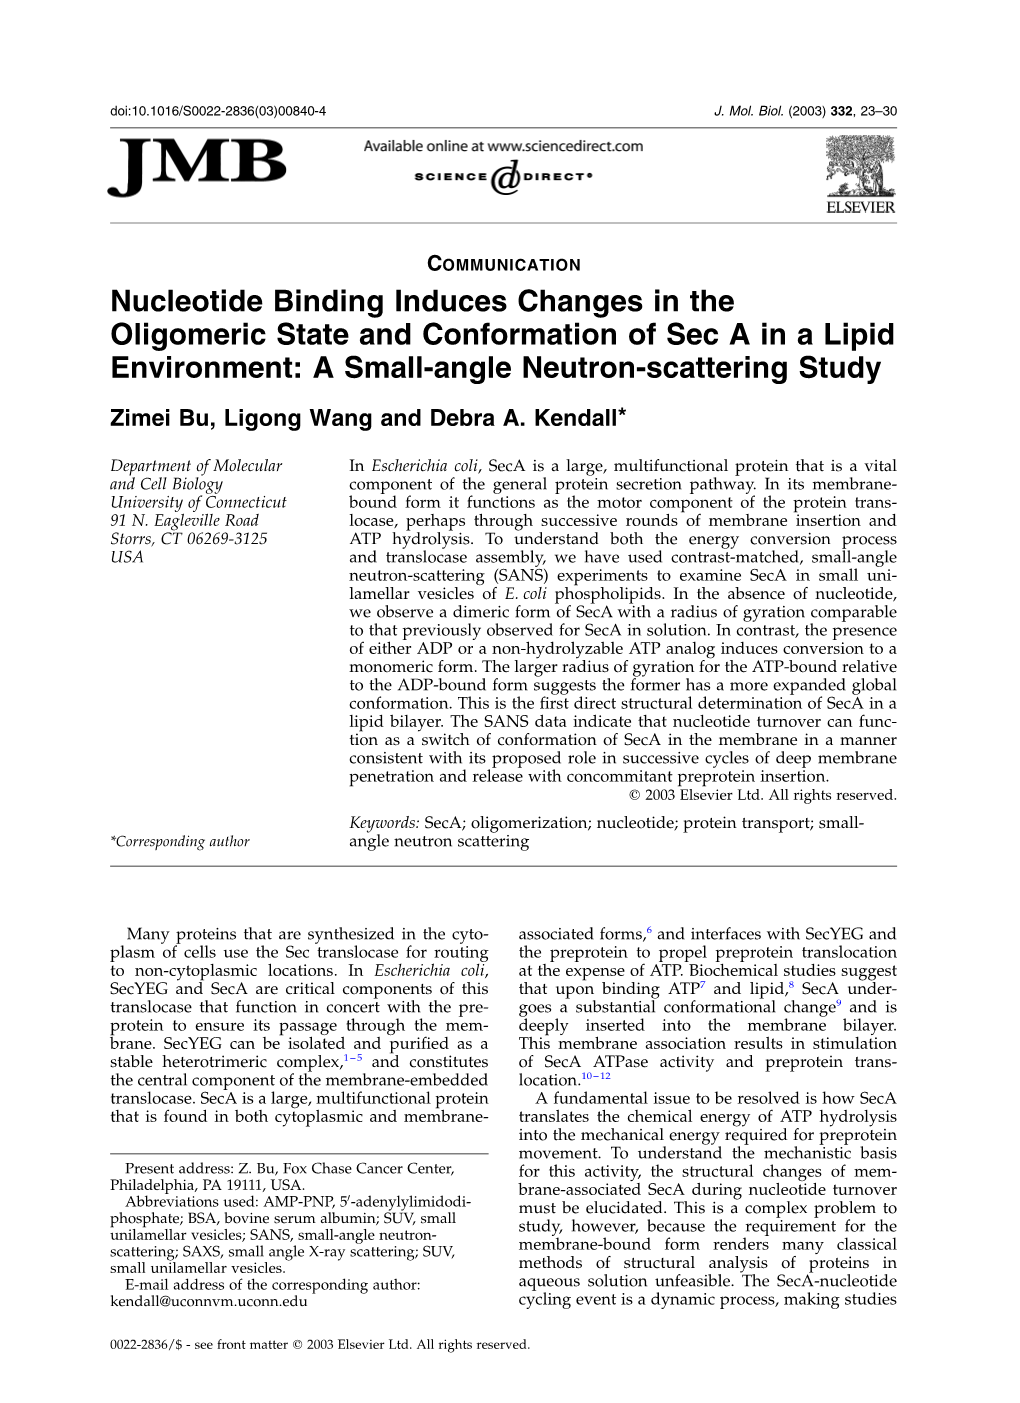 Nucleotide Binding Induces Changes in the Oligomeric State and Conformation of Sec a in a Lipid Environment: a Small-Angle Neutron-Scattering Study